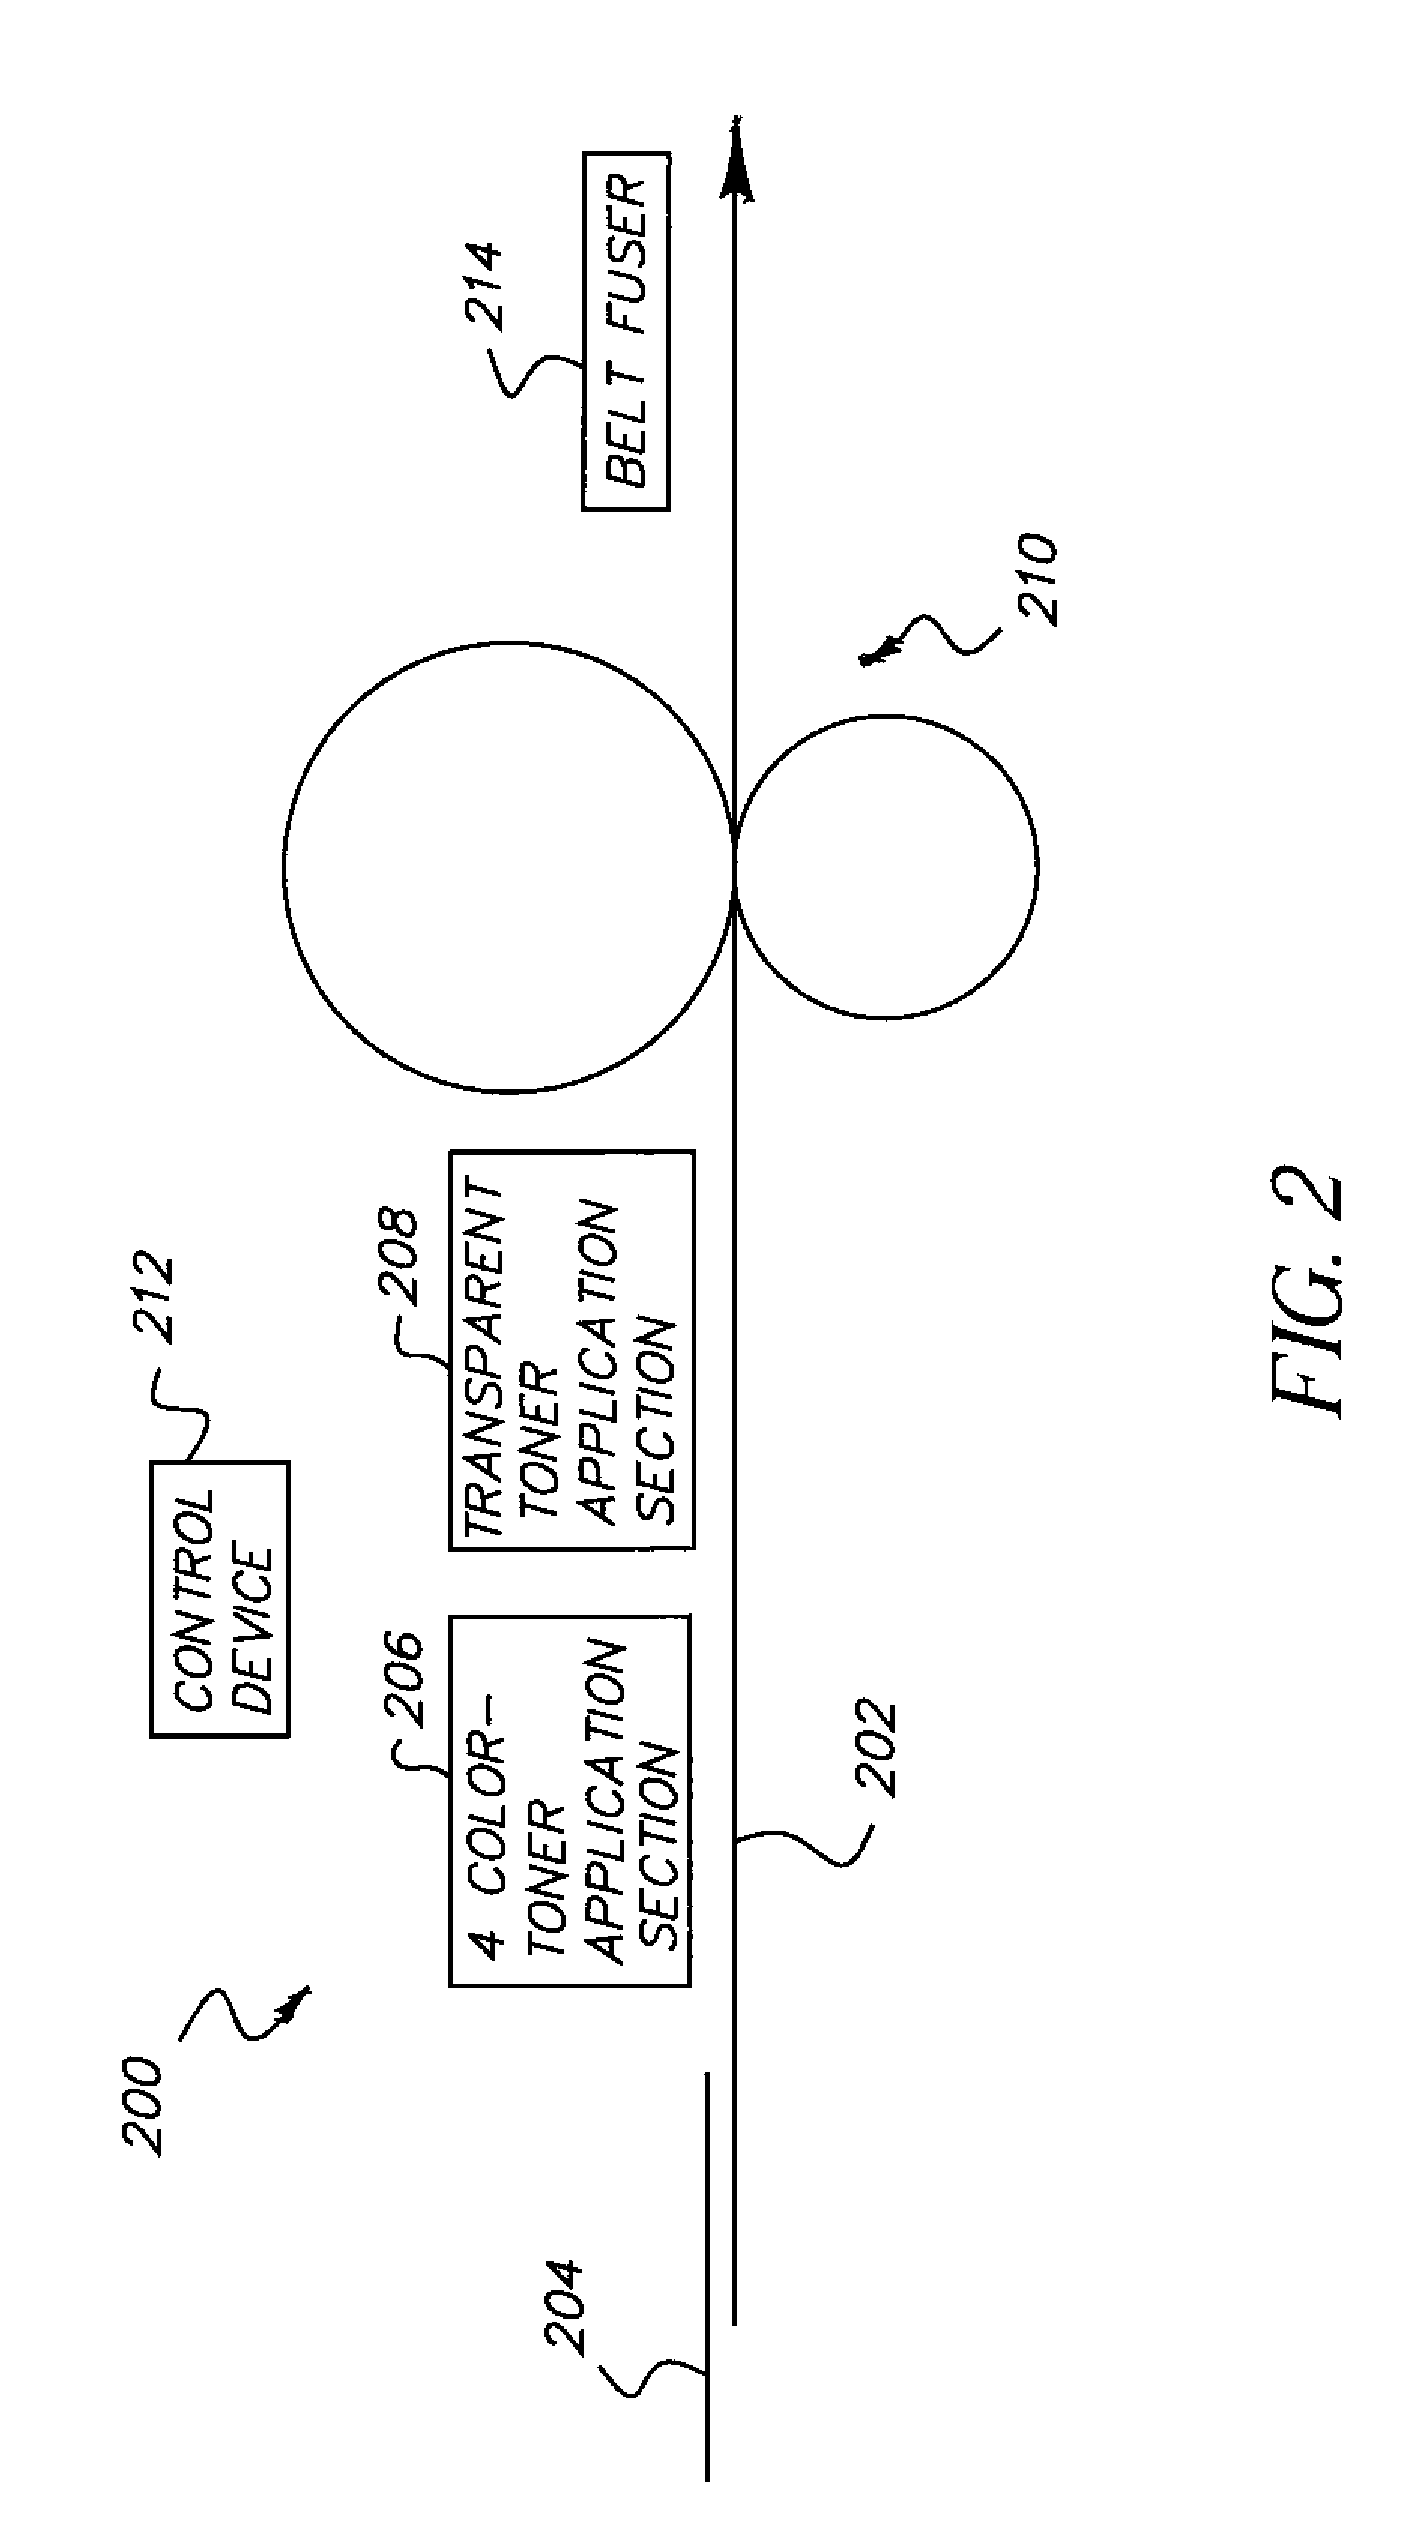 Adjustable gloss control method with different substrates and 3-d image effect with adjustable gloss